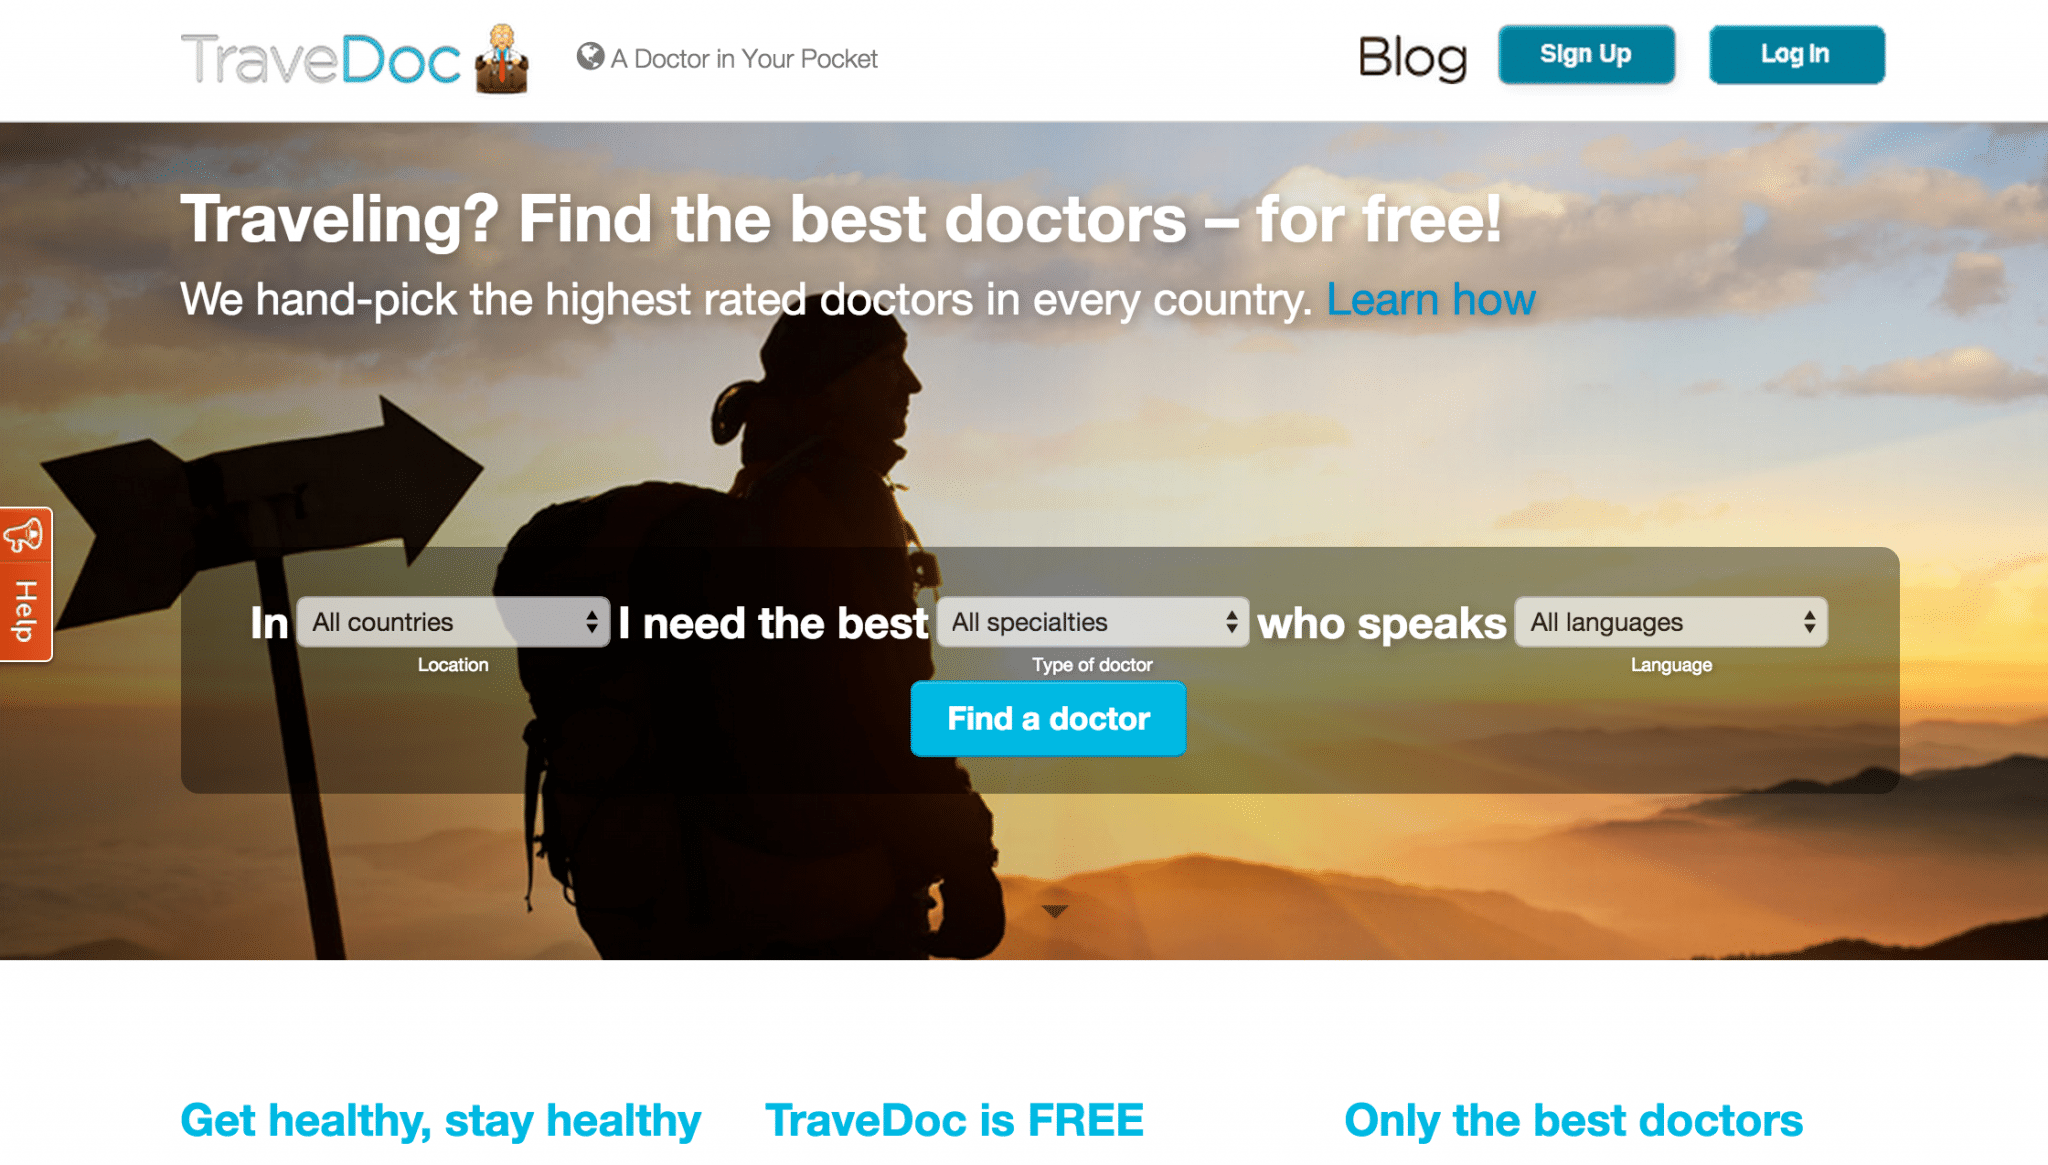 TraveDoc is the online doctor appointment scheduling service for people living and traveling in a new country.